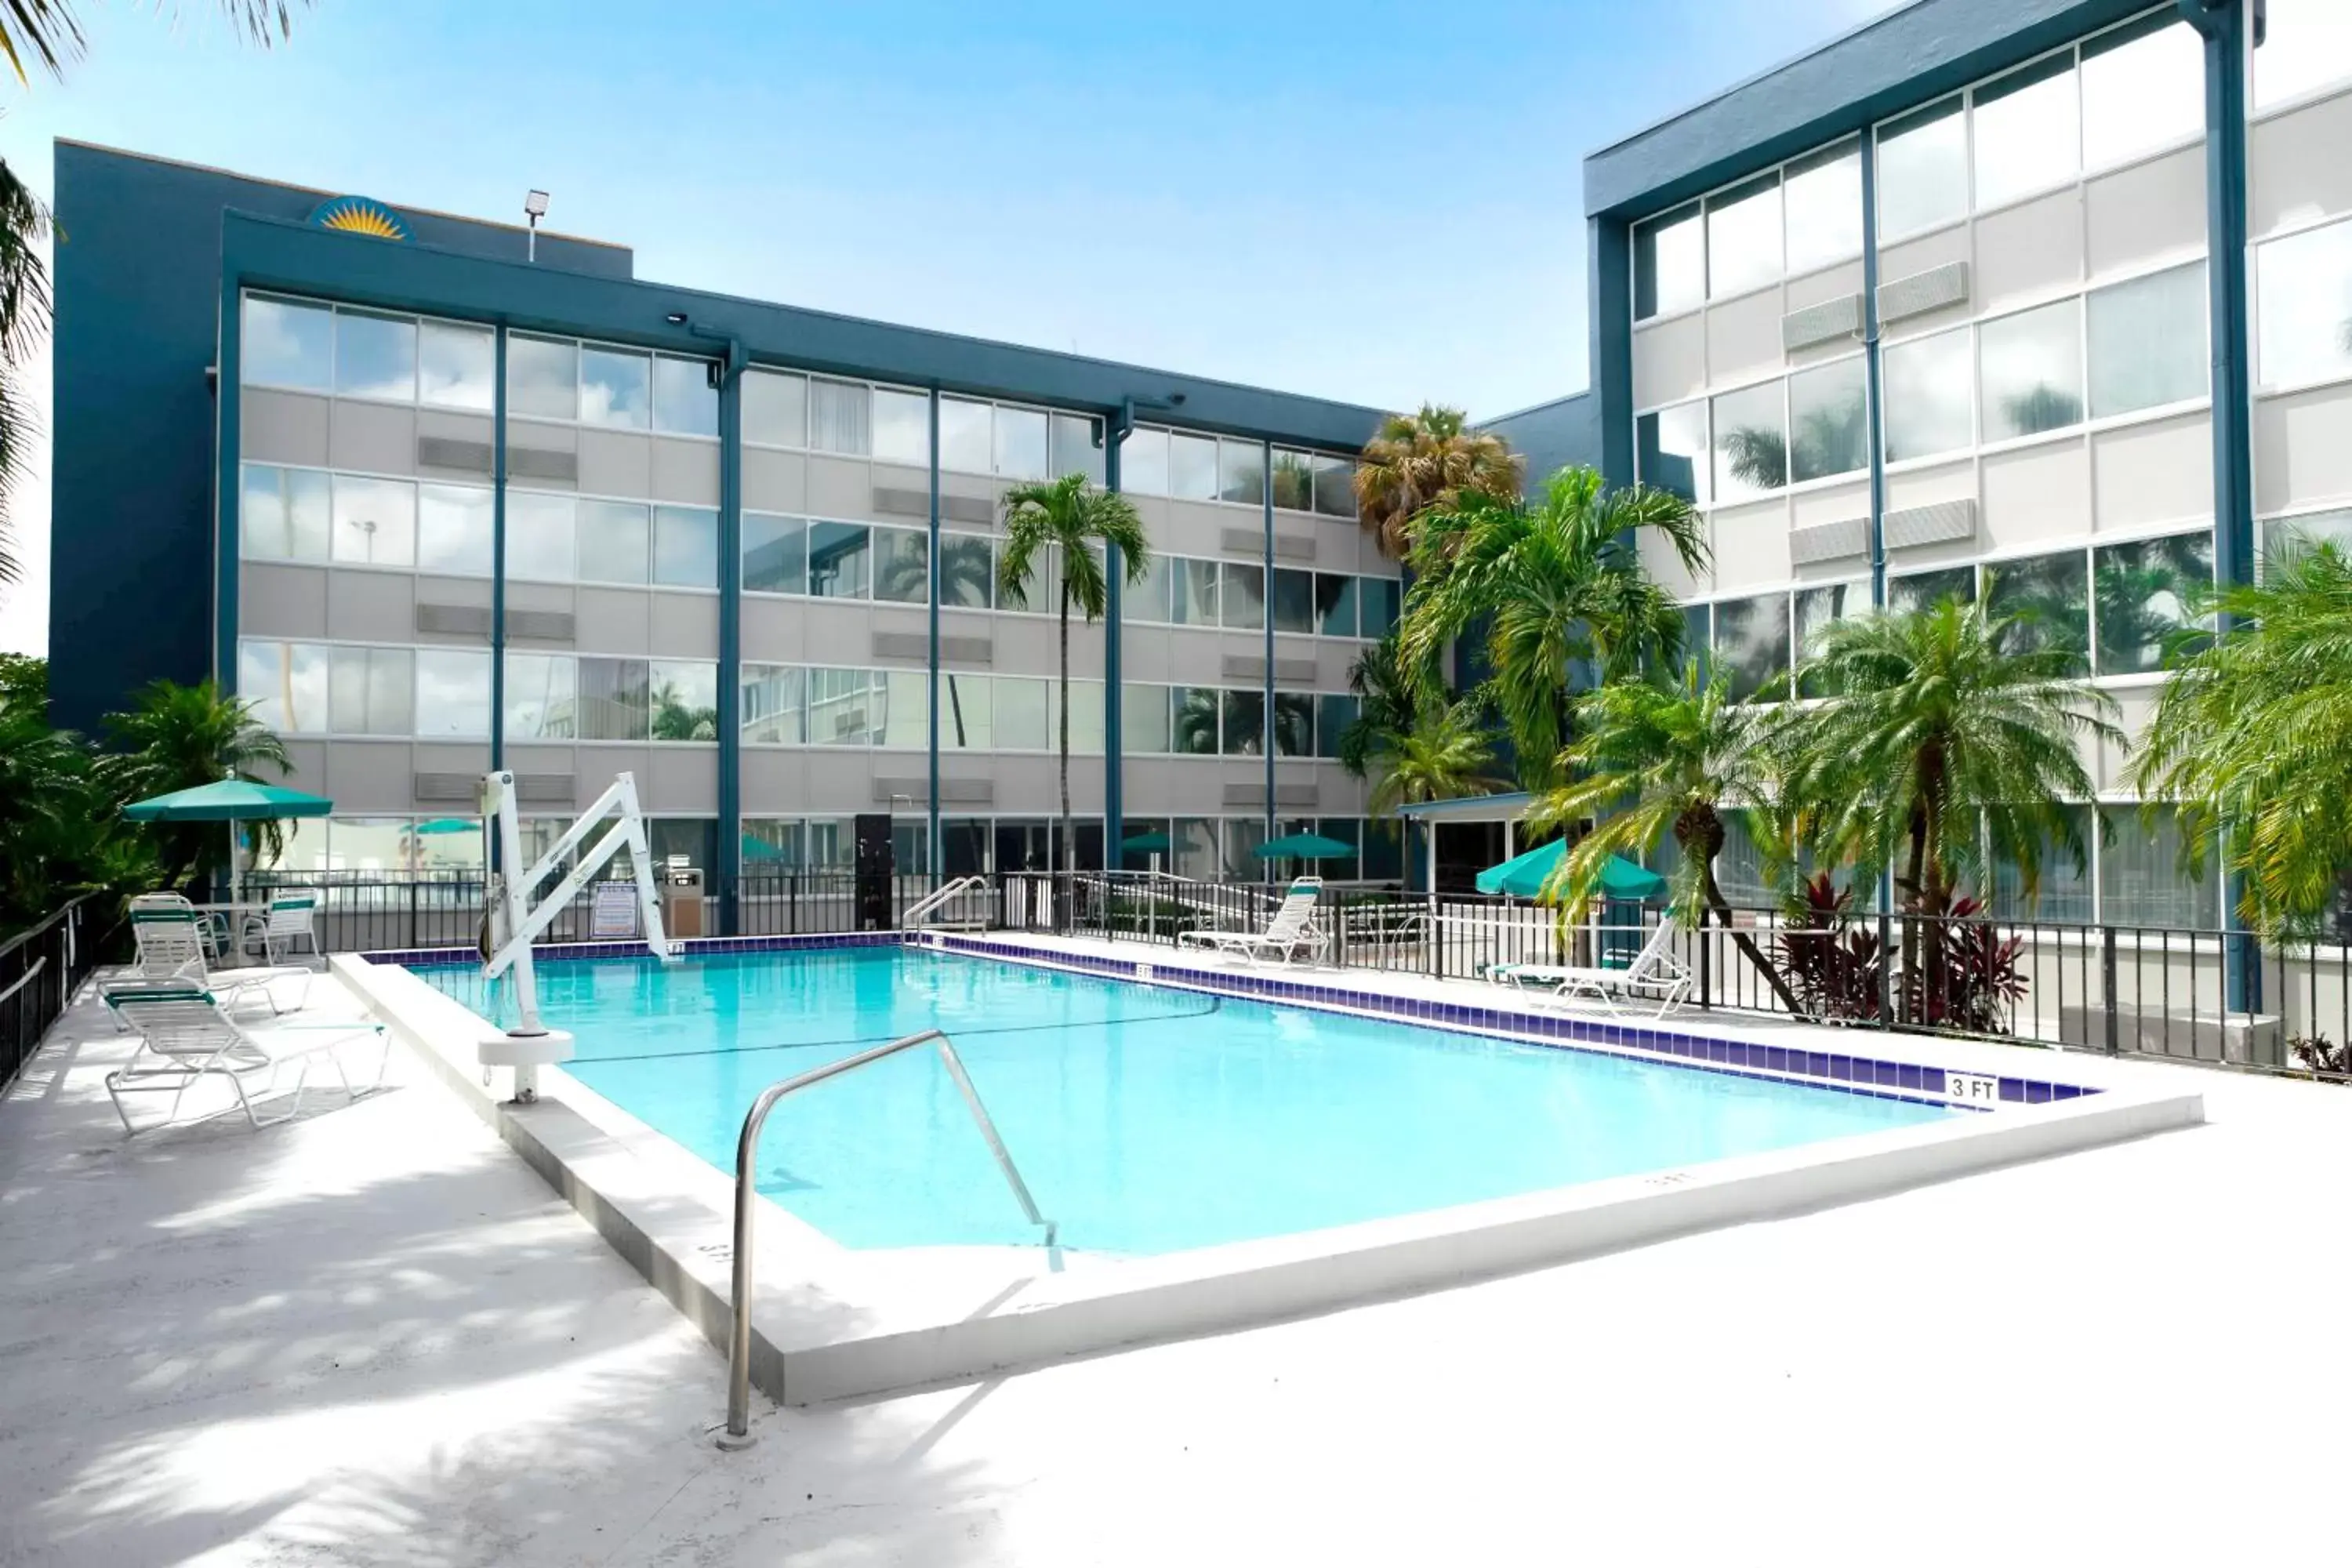 Swimming pool, Property Building in Days Inn by Wyndham Miami International Airport